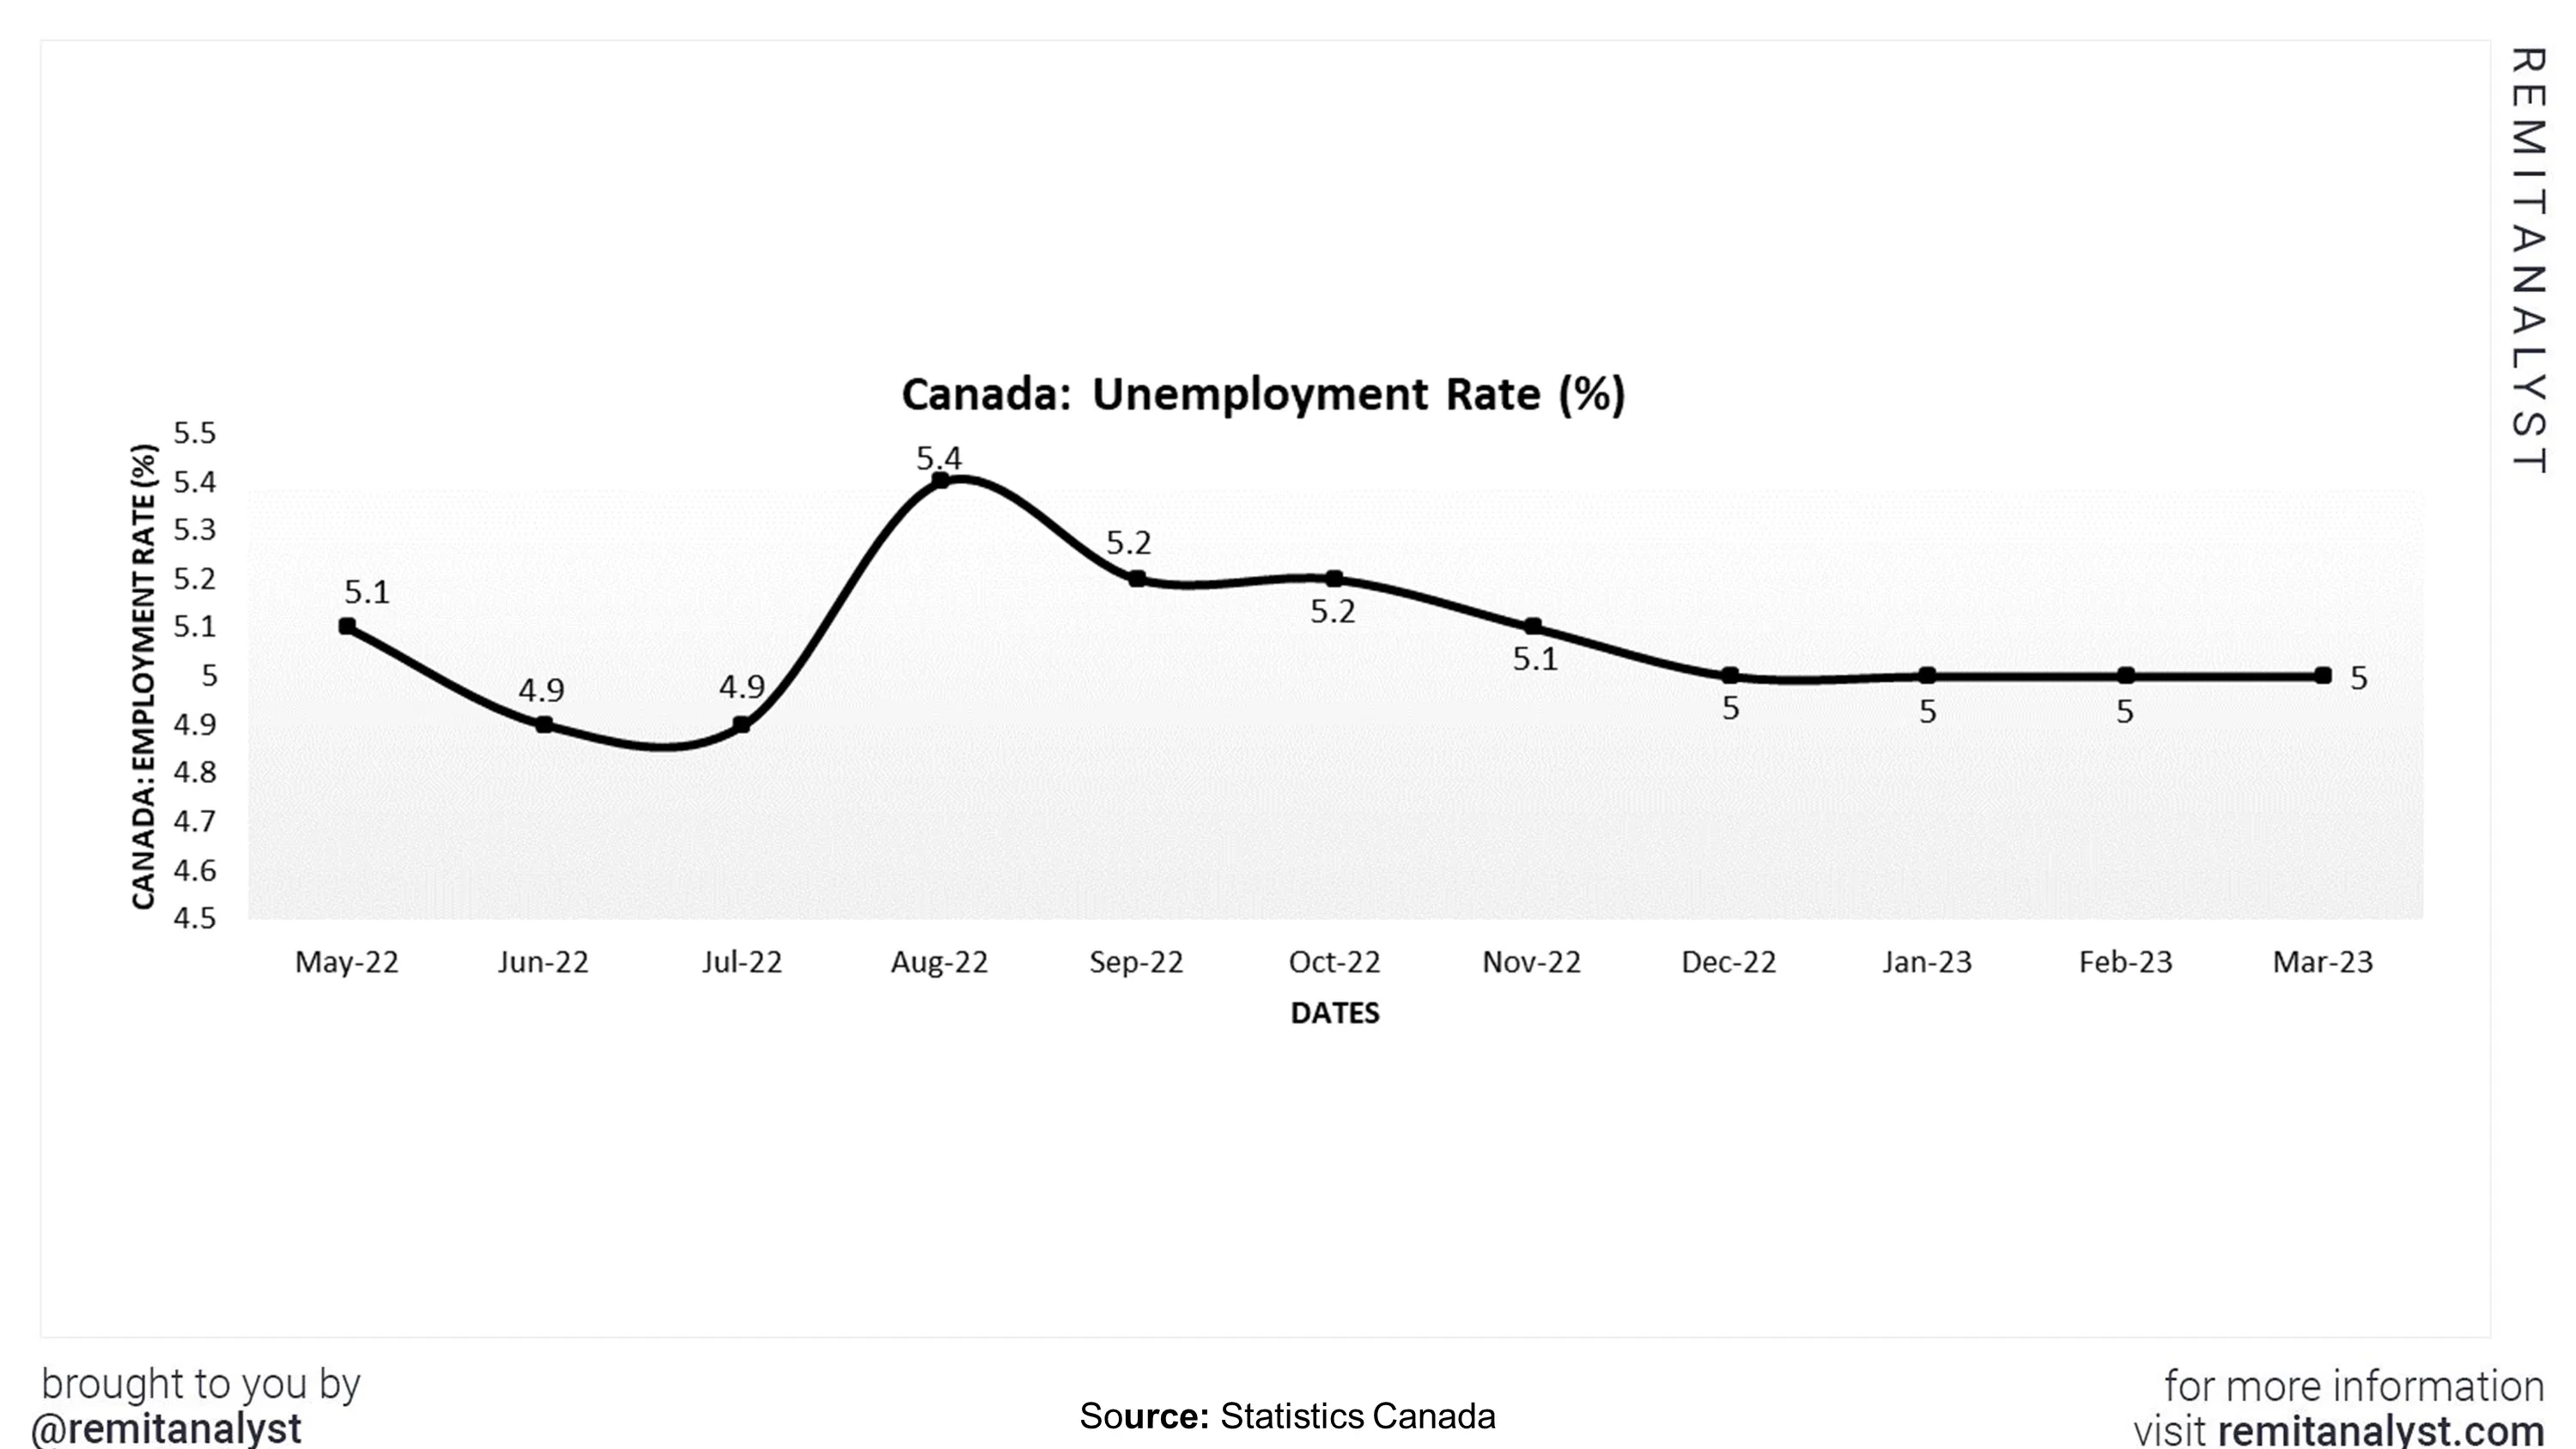 unemployment-rate-canada-from-may-2022-to-mar-2023